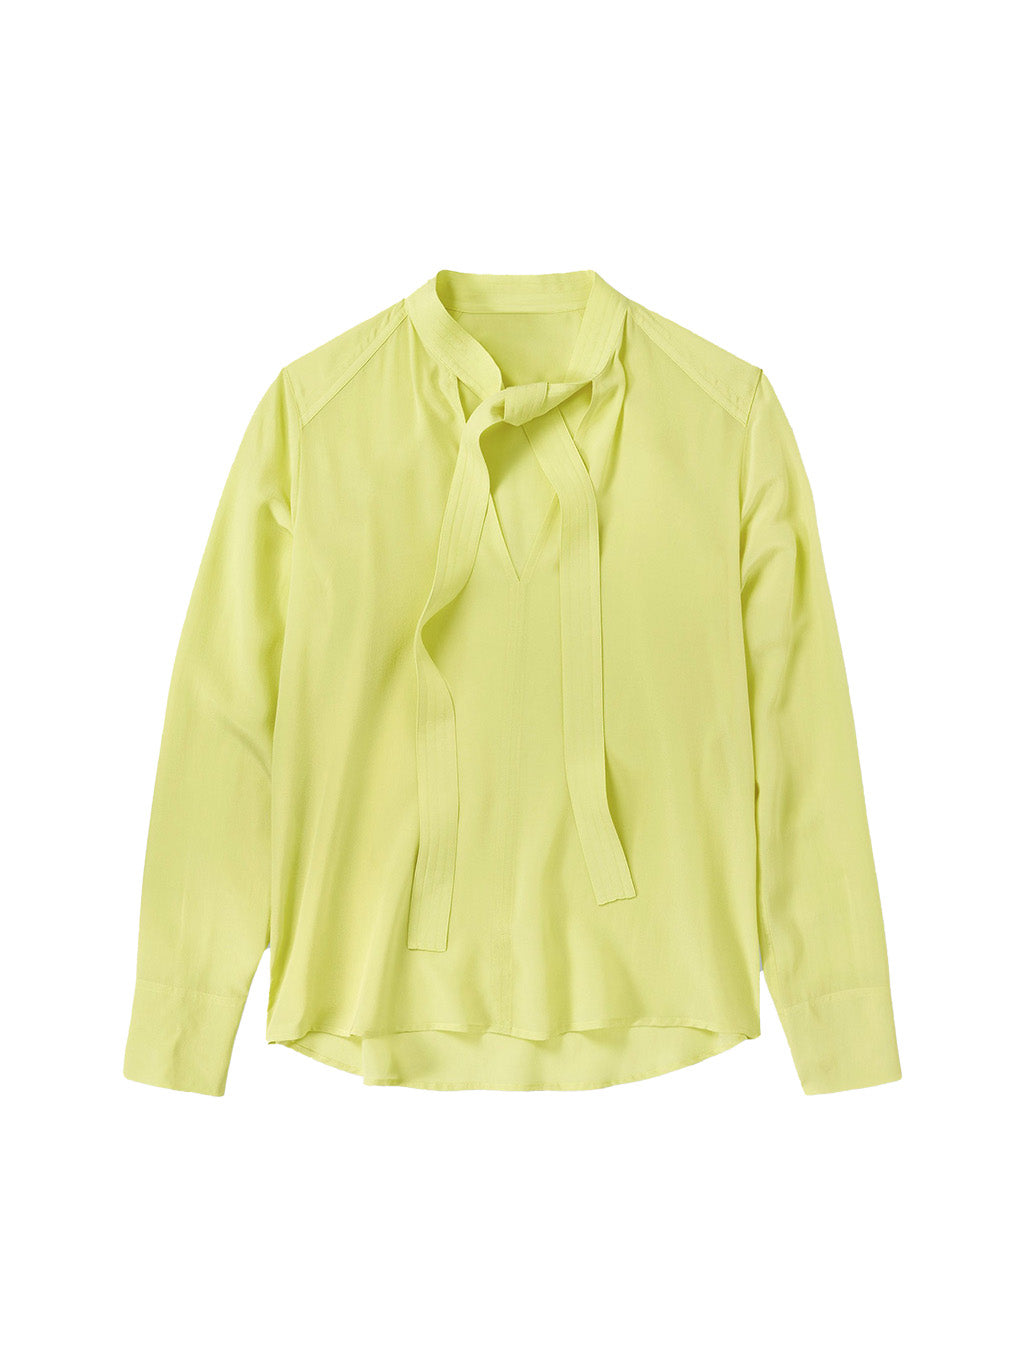 Silk Blouse in Primary Yellow